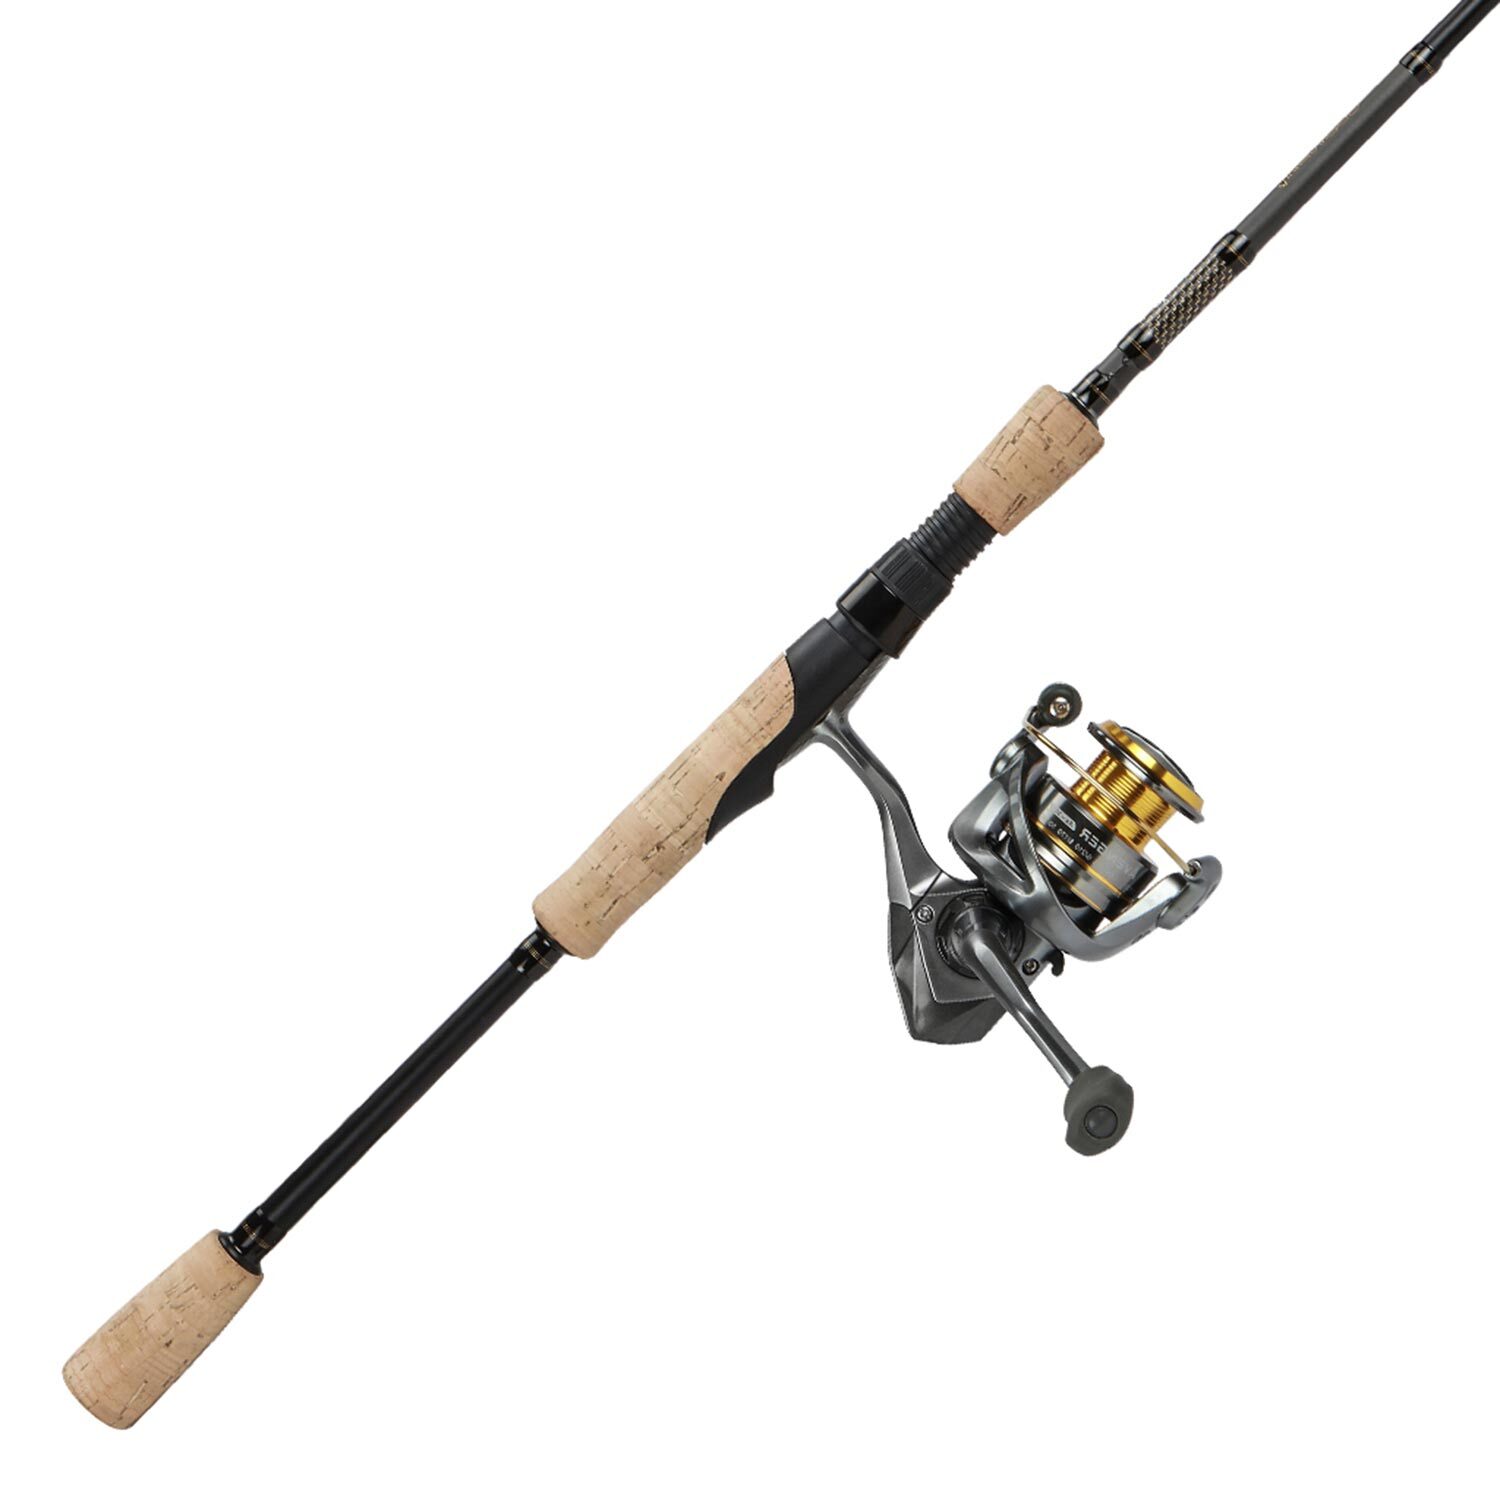 Buy Okuma Tomcat 8000 Tournament Concept Light Stickbait Combo with Braid  7ft 9in PE4-6 2pc online at